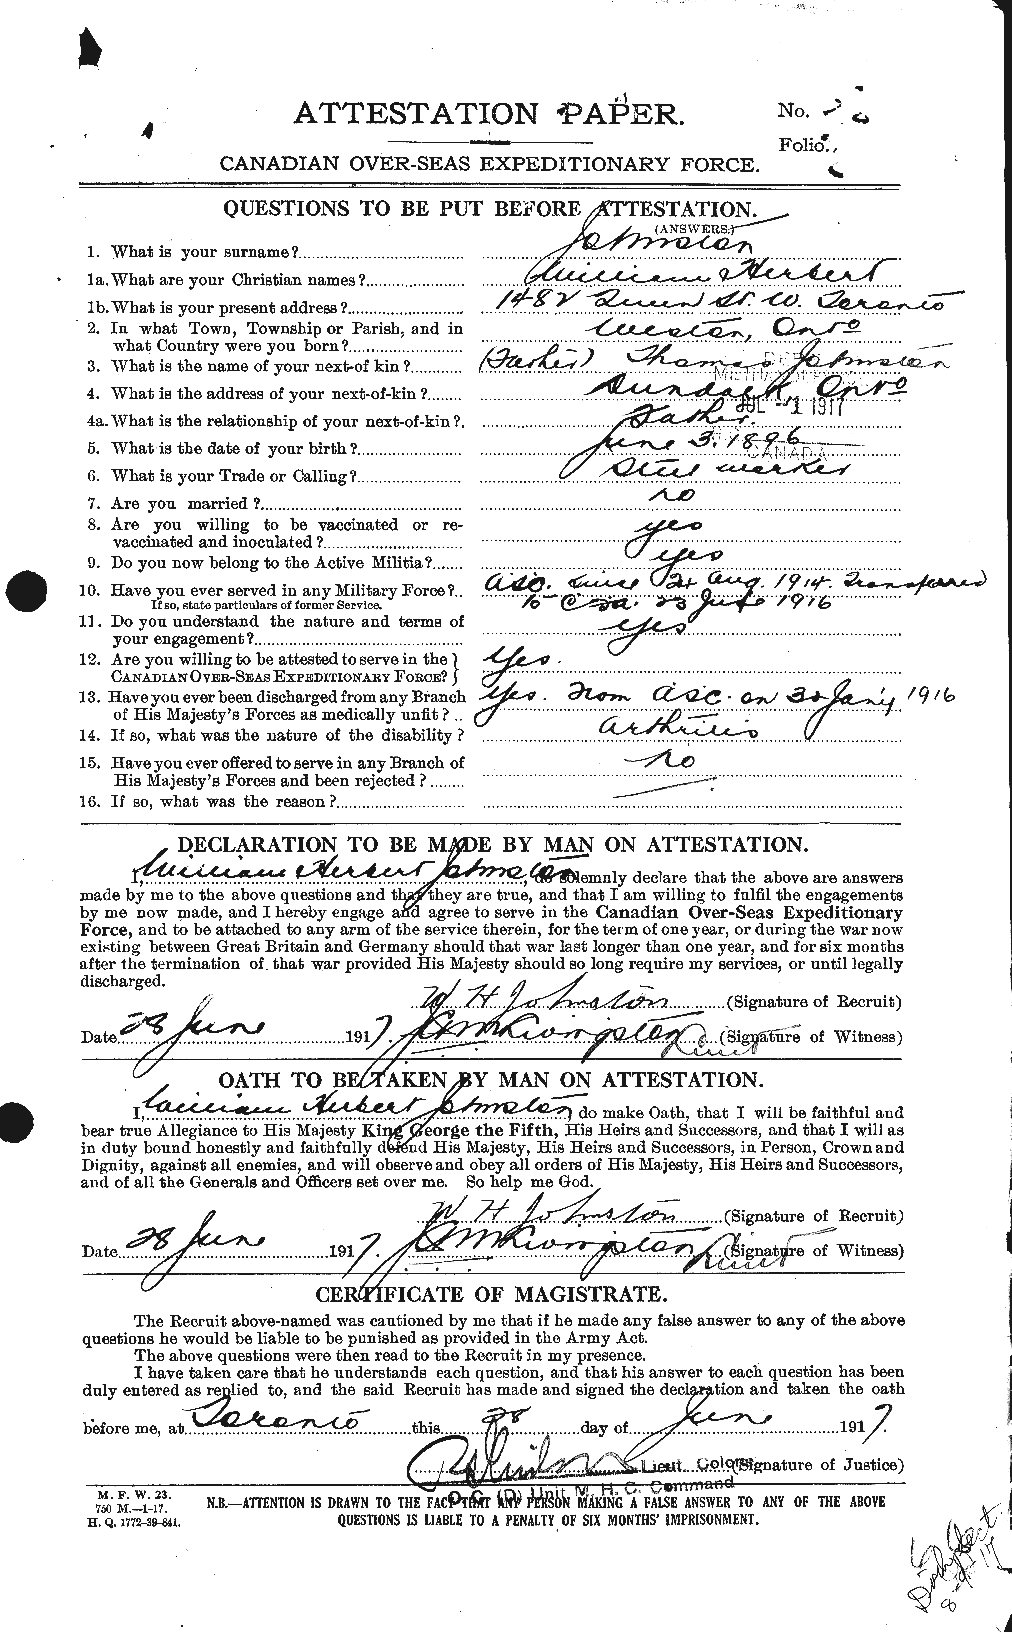 Personnel Records of the First World War - CEF 427346a